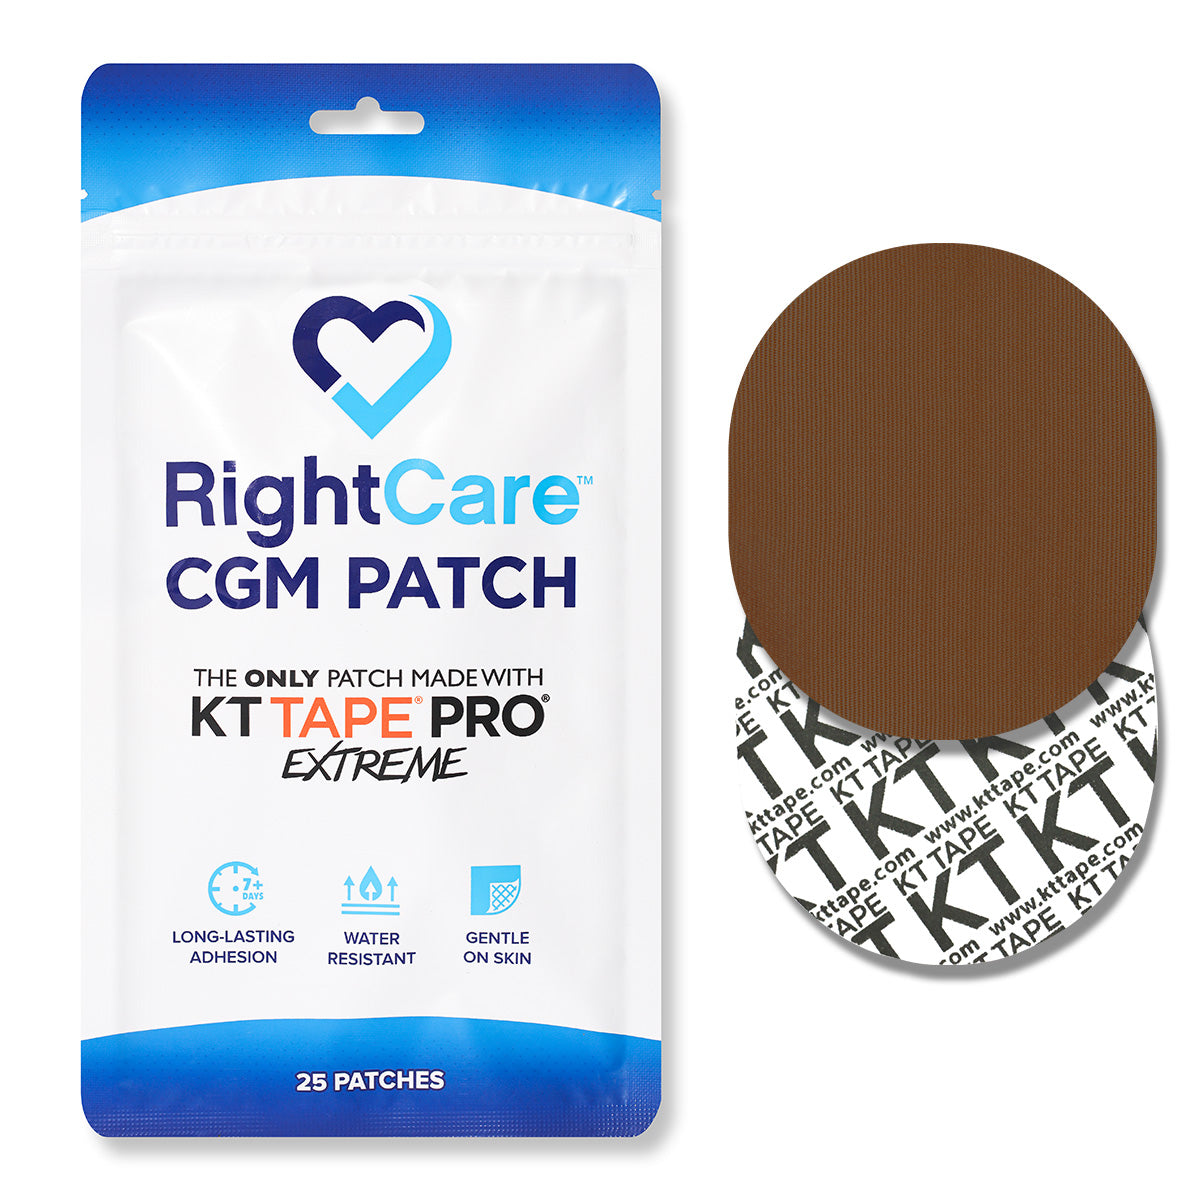 RightCare CGM Adhesive Patch made with KT Tape, Universal, Bag of 25 96026510